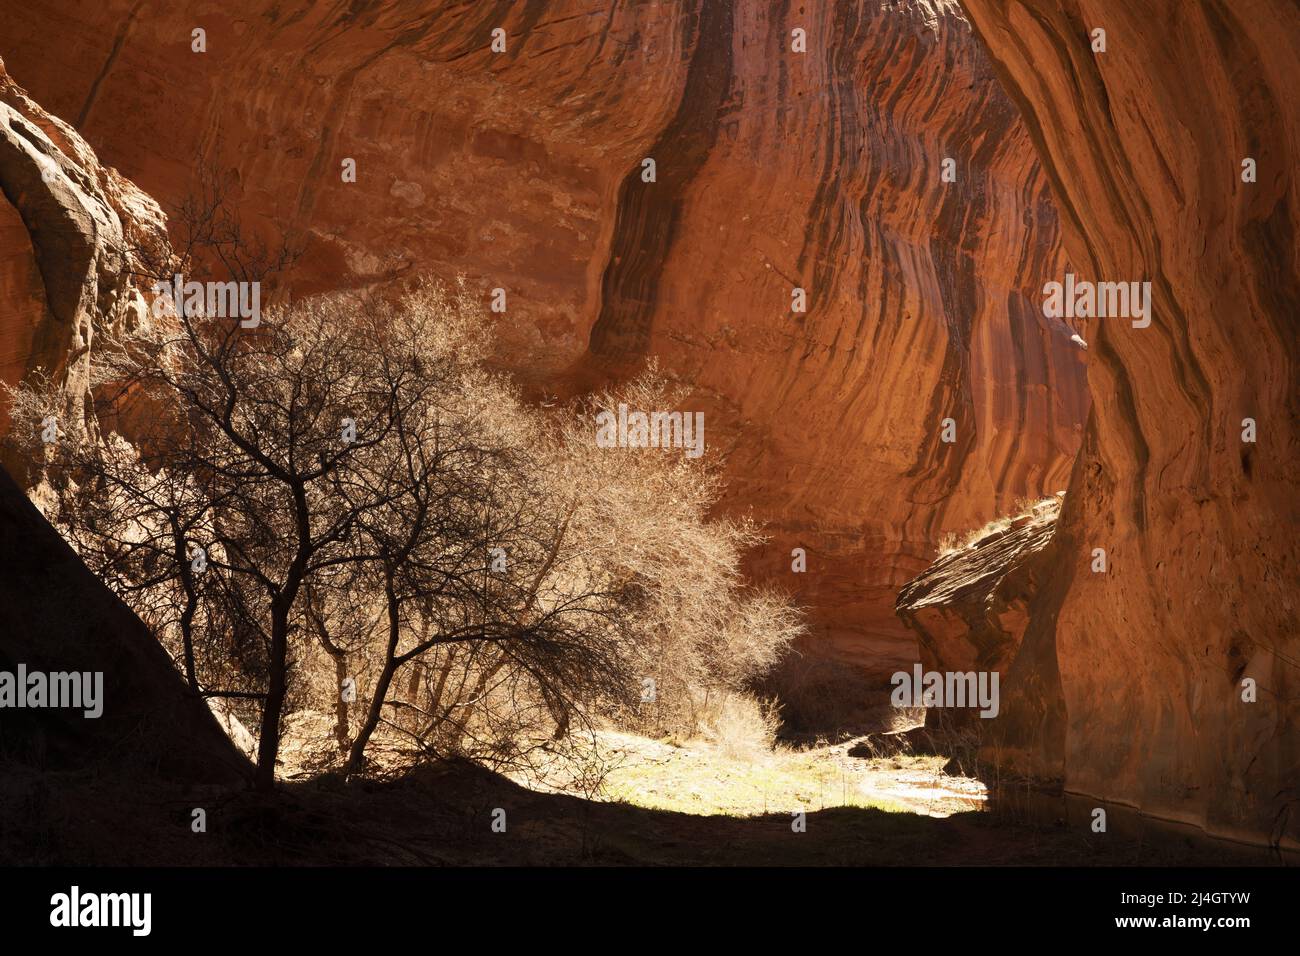 Trees silhouetted against sandstone cliffs, Neon Canyon, Glen Canyon National Recreation Area, Garfield County, Utah, USA Stock Photo